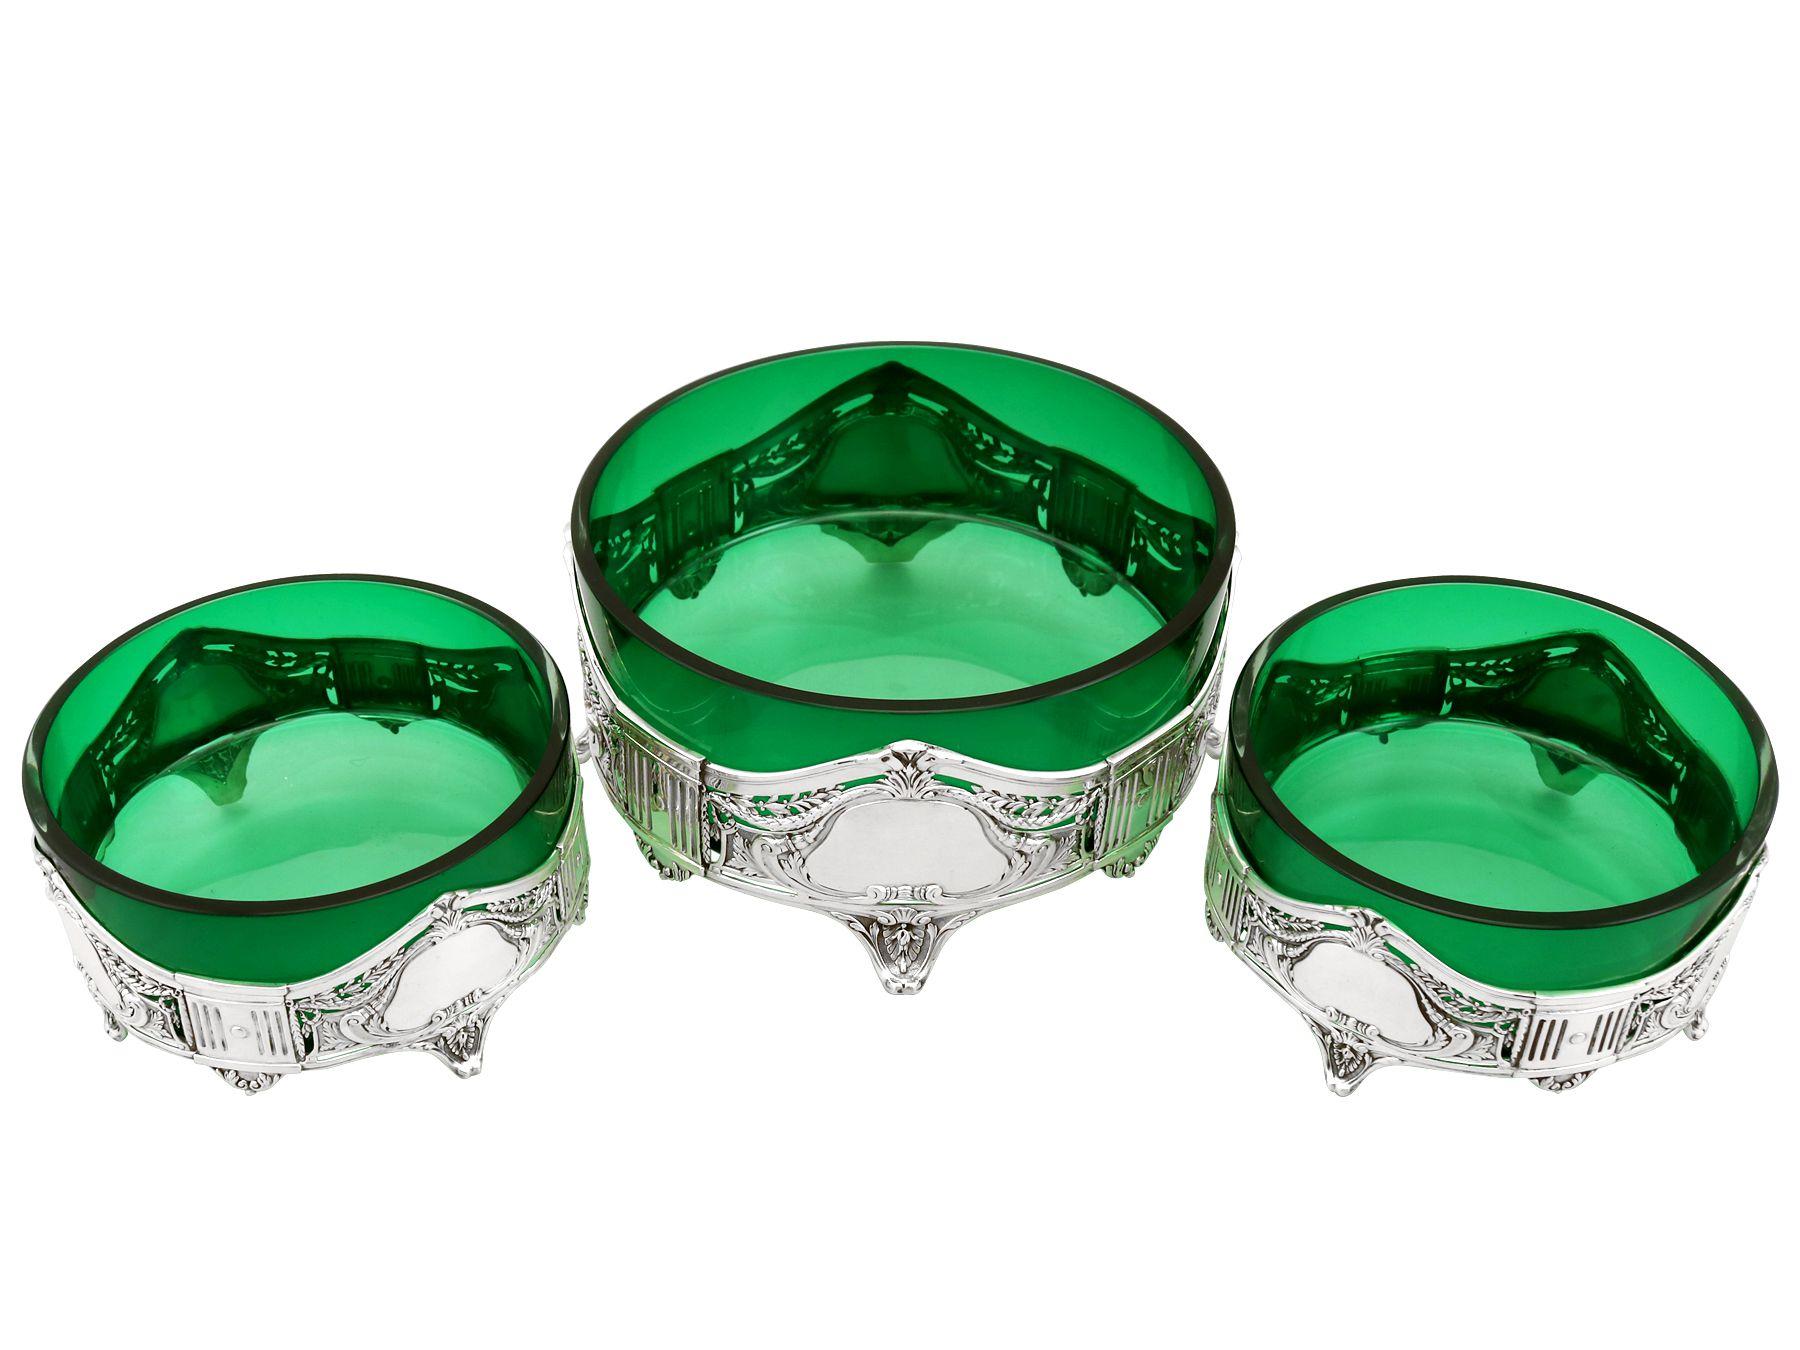 A fine and impressive suite of three antique German silver and green glass dishes, in the Art Nouveau style; an addition to our silver mounted glass collection.

These fine antique German silver and green glass dishes have a circular shaped form